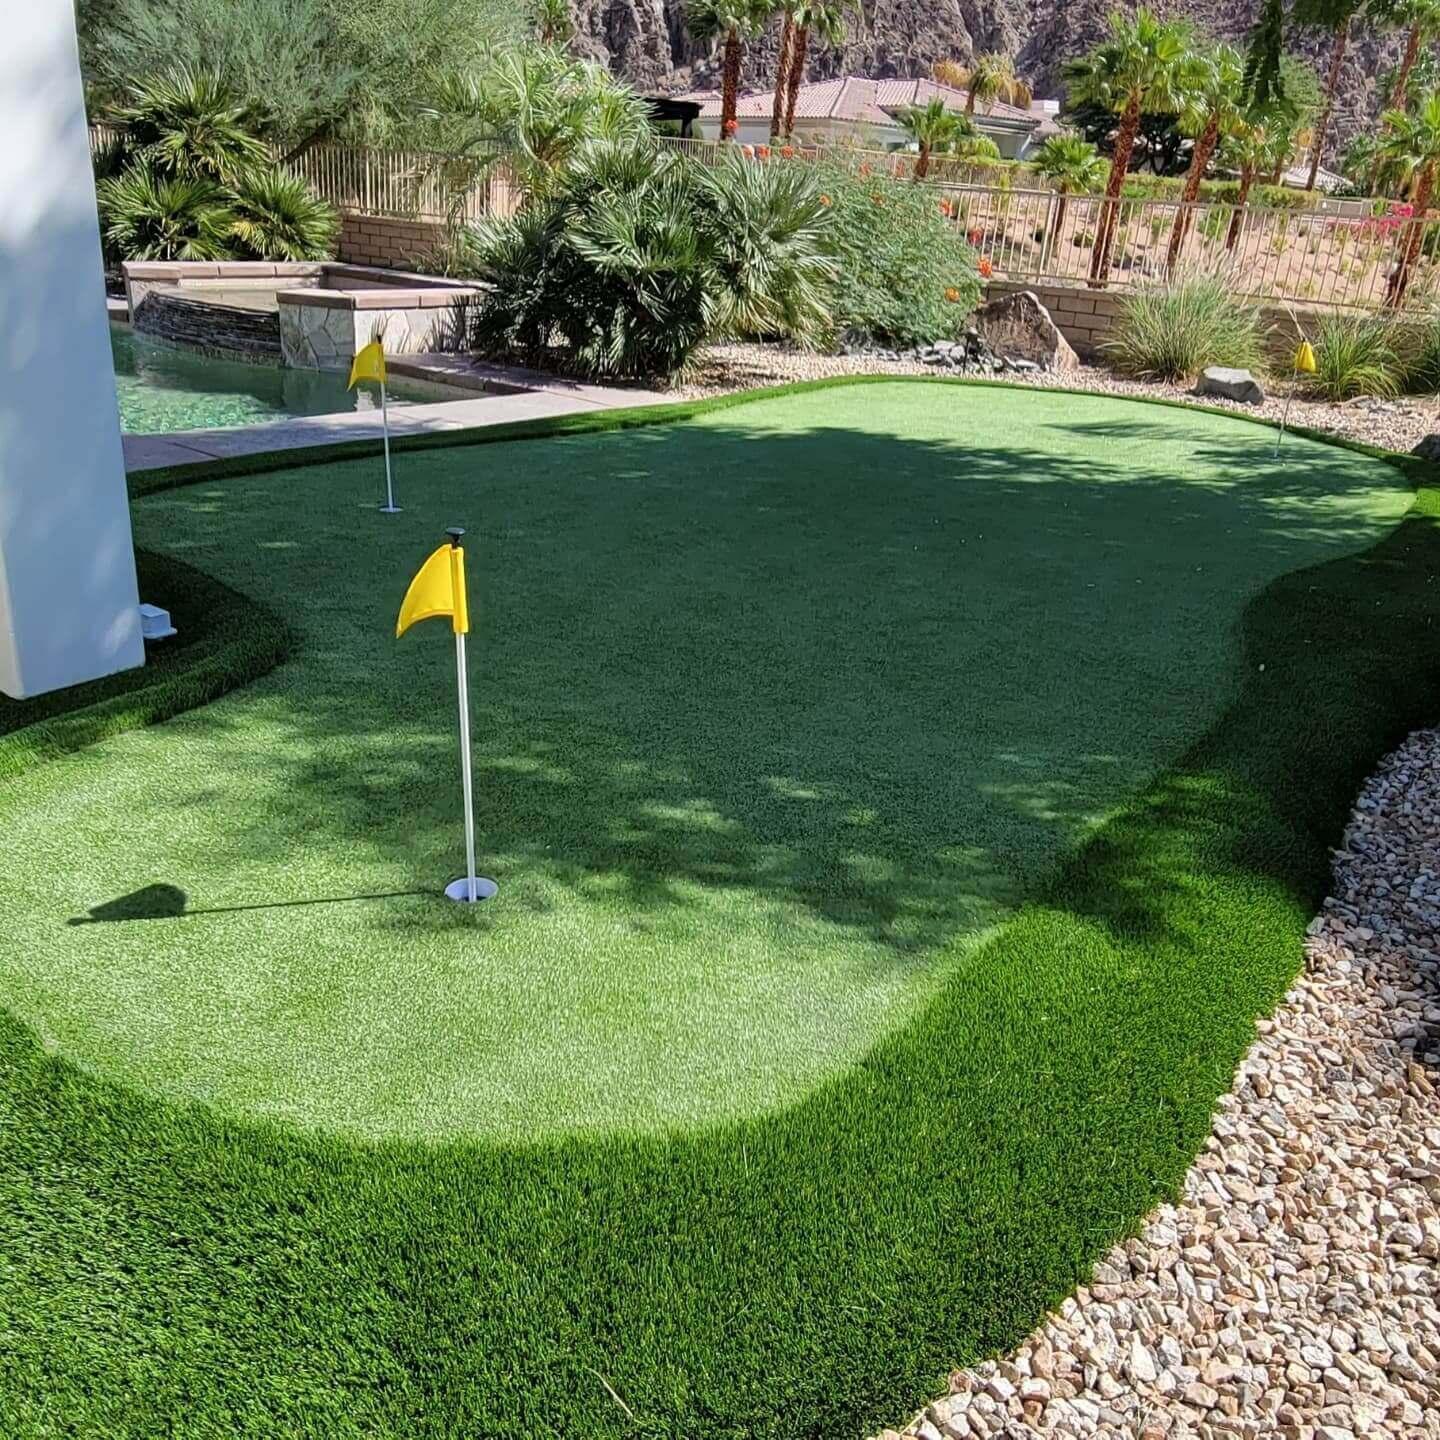 Landscape design with putting green